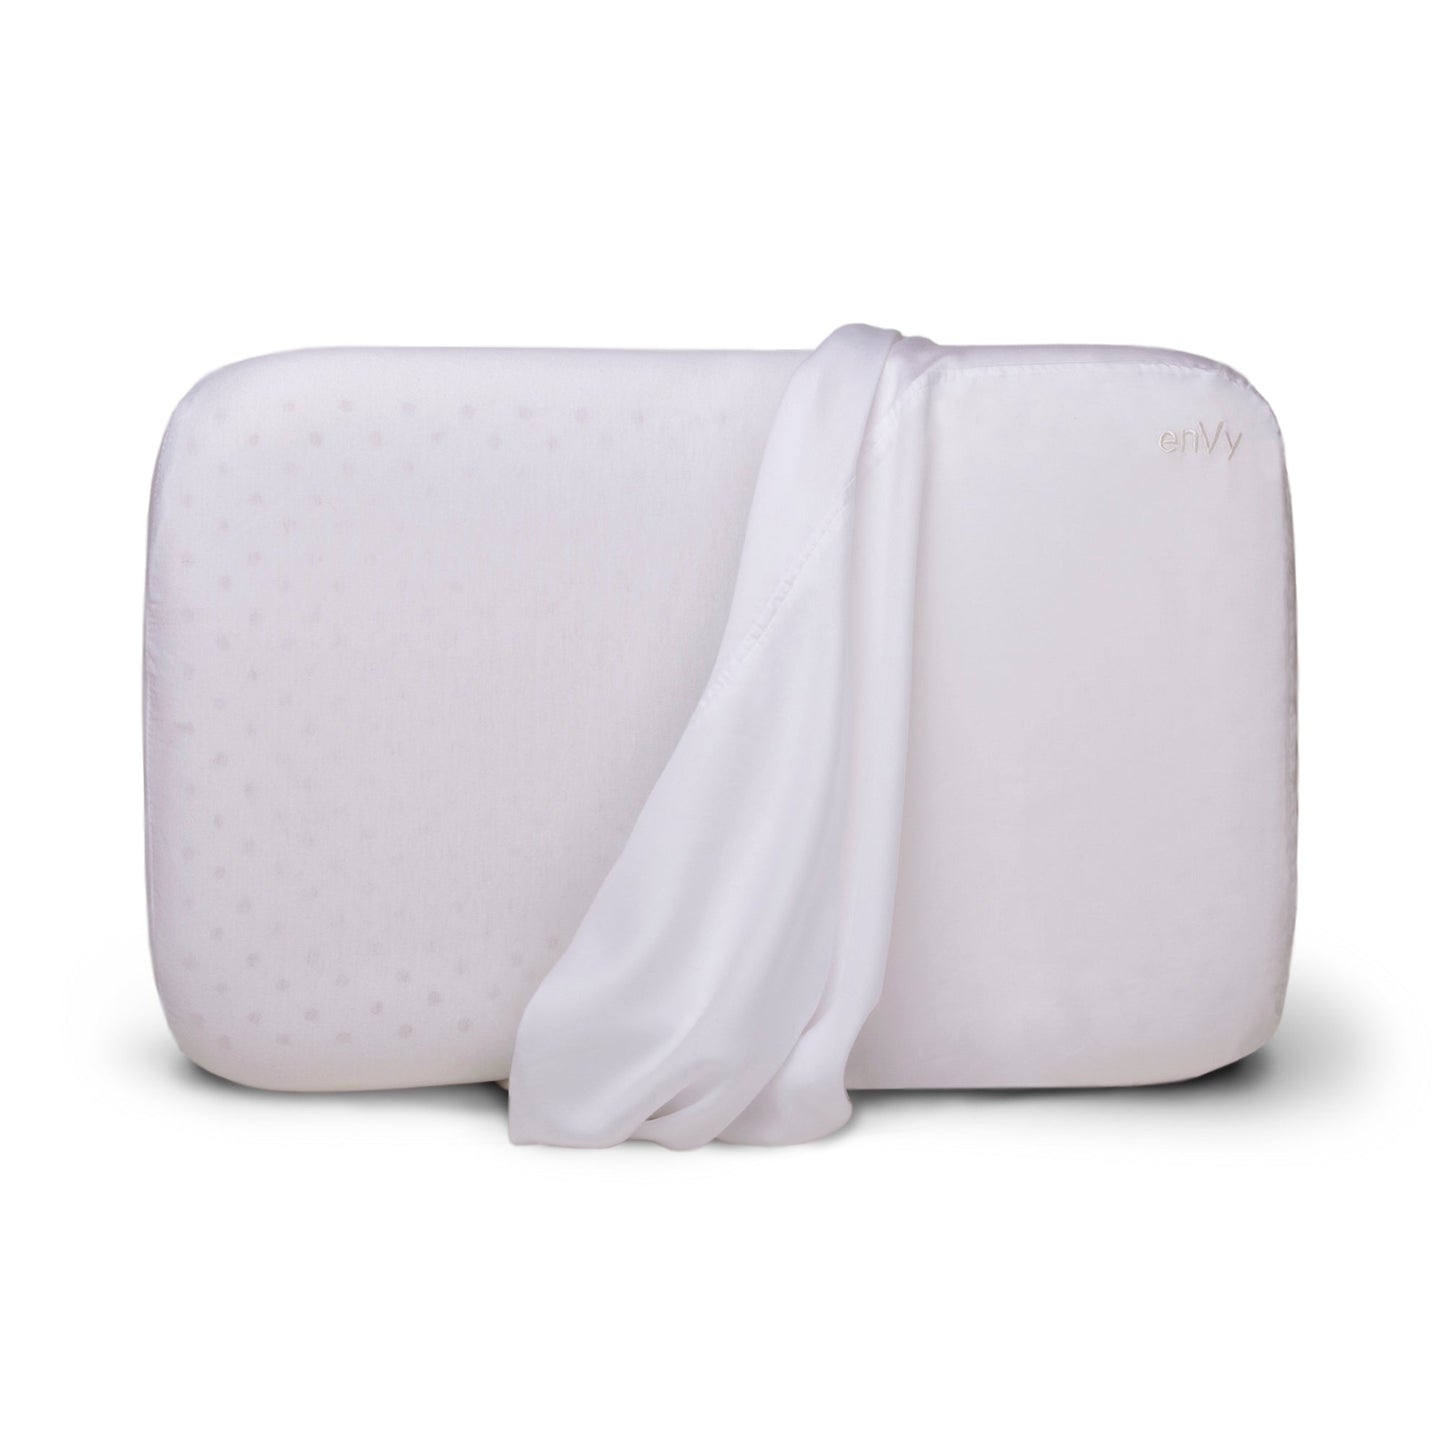 envy™ copper powered natural latex pillow (tencel™ cover)